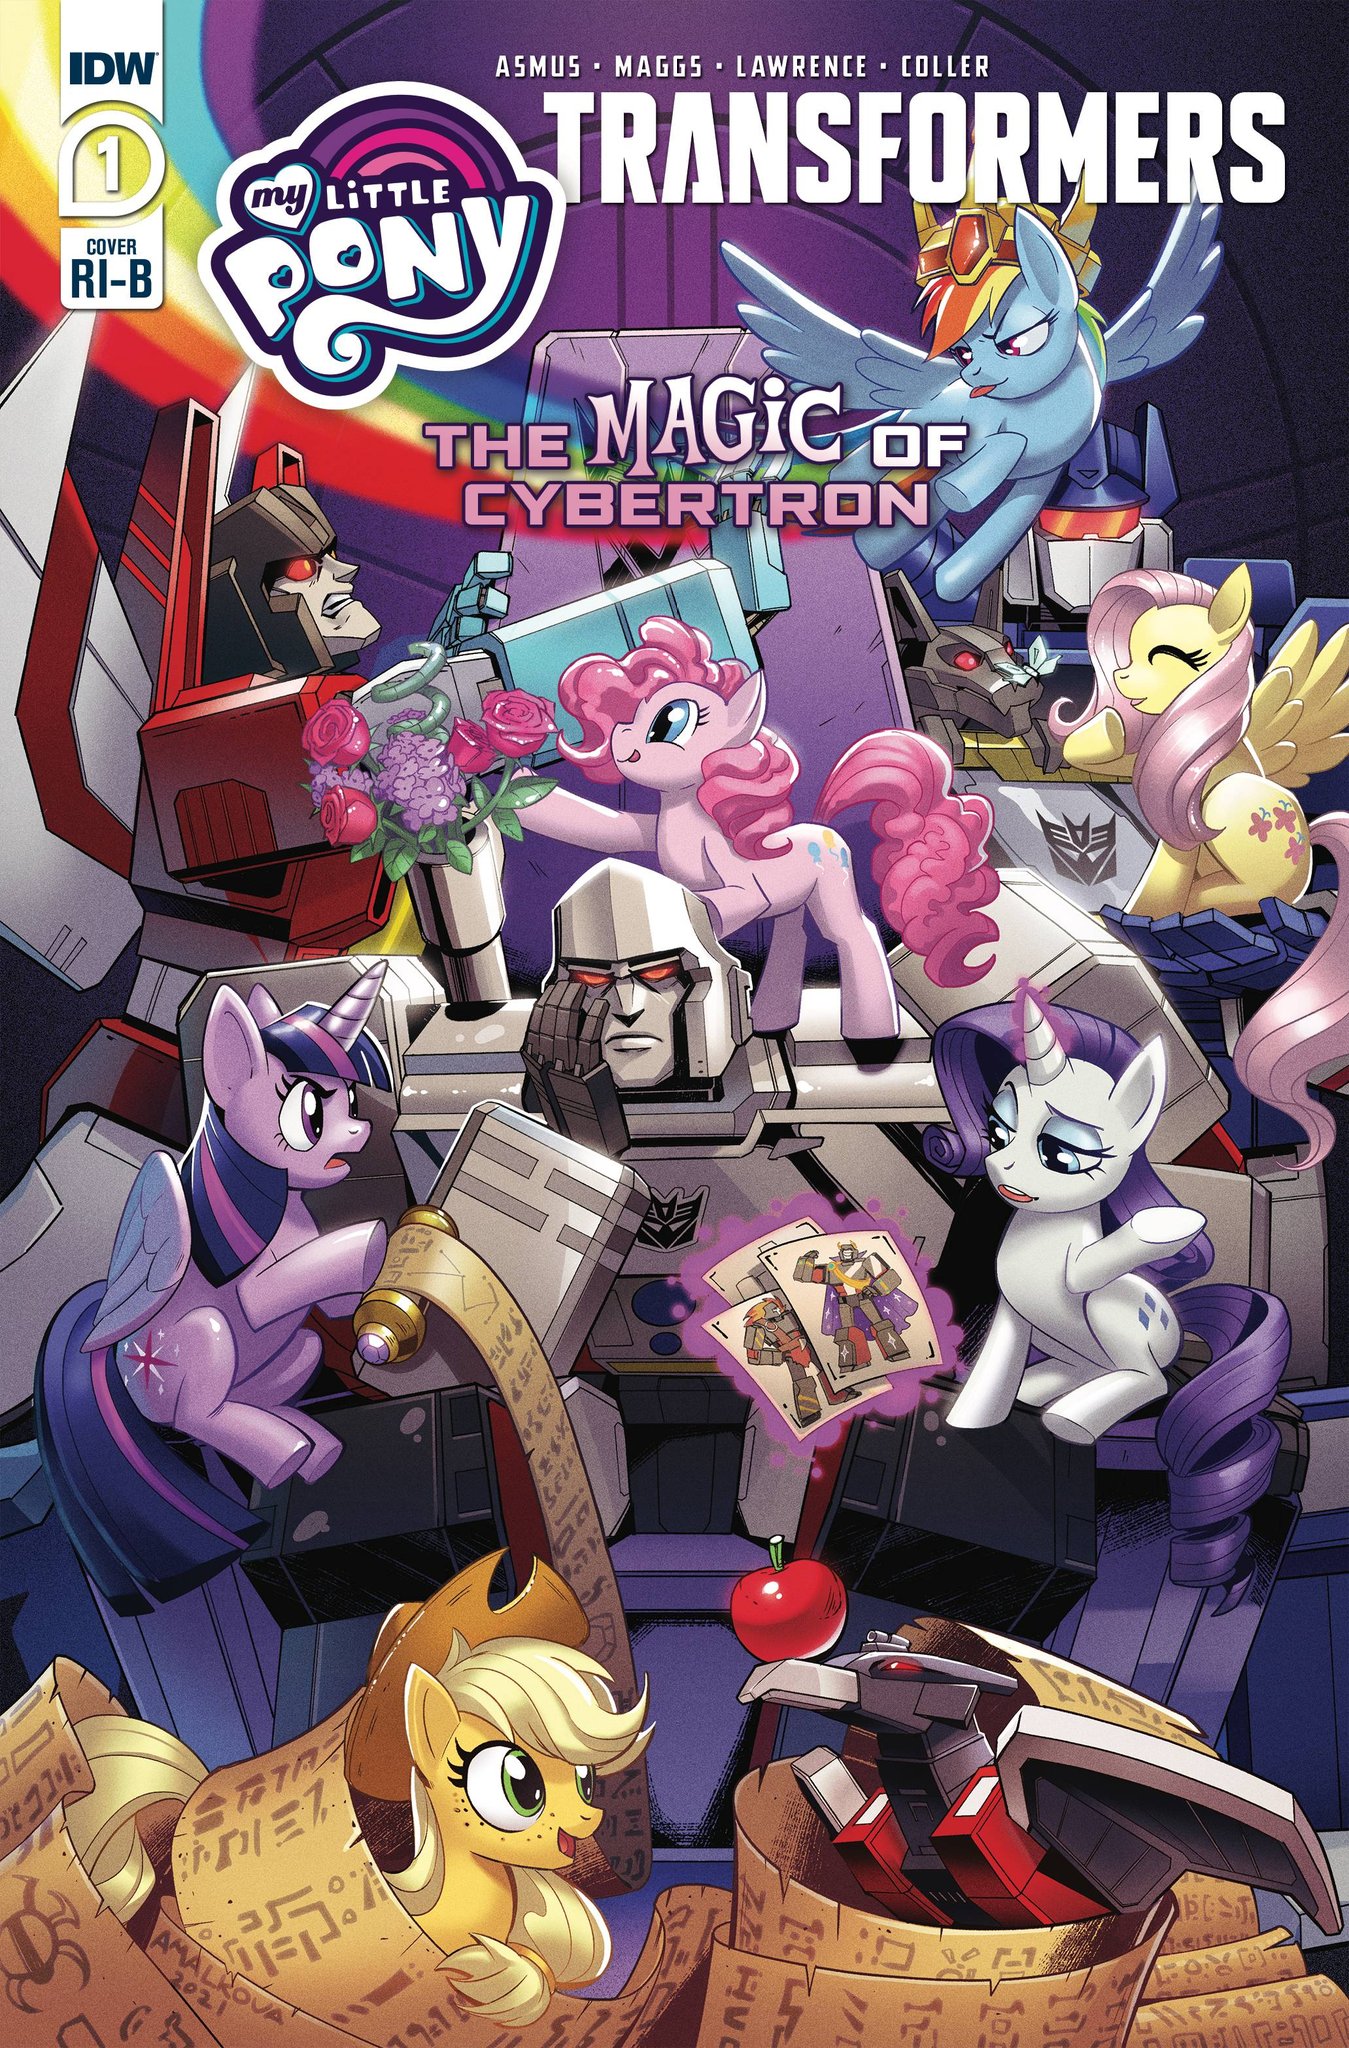 Equestria Daily MLP Stuff! Retail Incentive Covers for